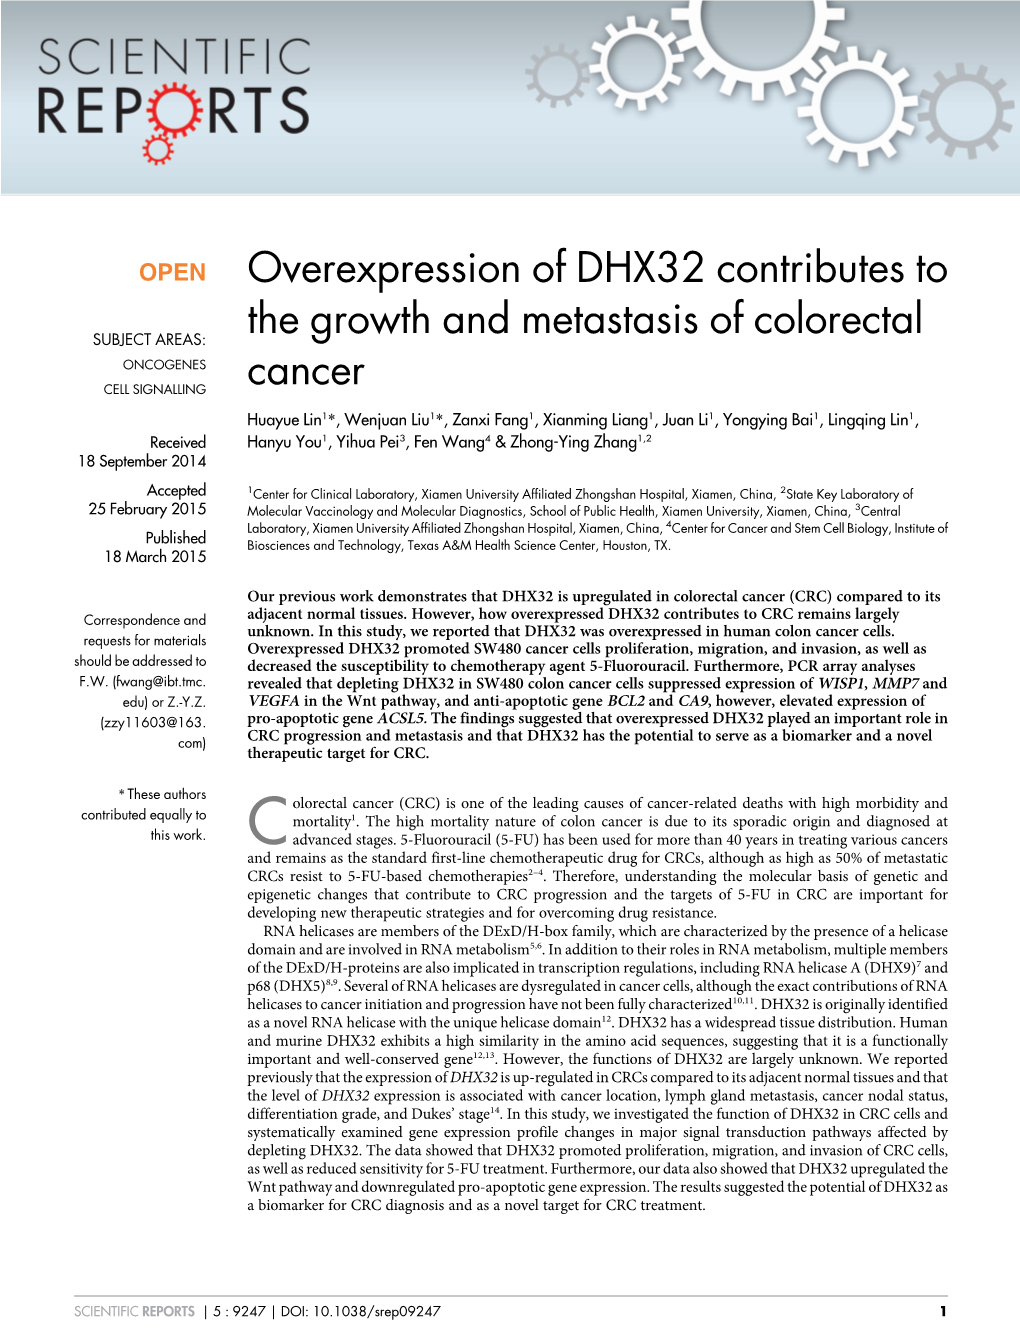 Overexpression of DHX32 Contributes to the Growth and Metastasis of Colorectal Cancer